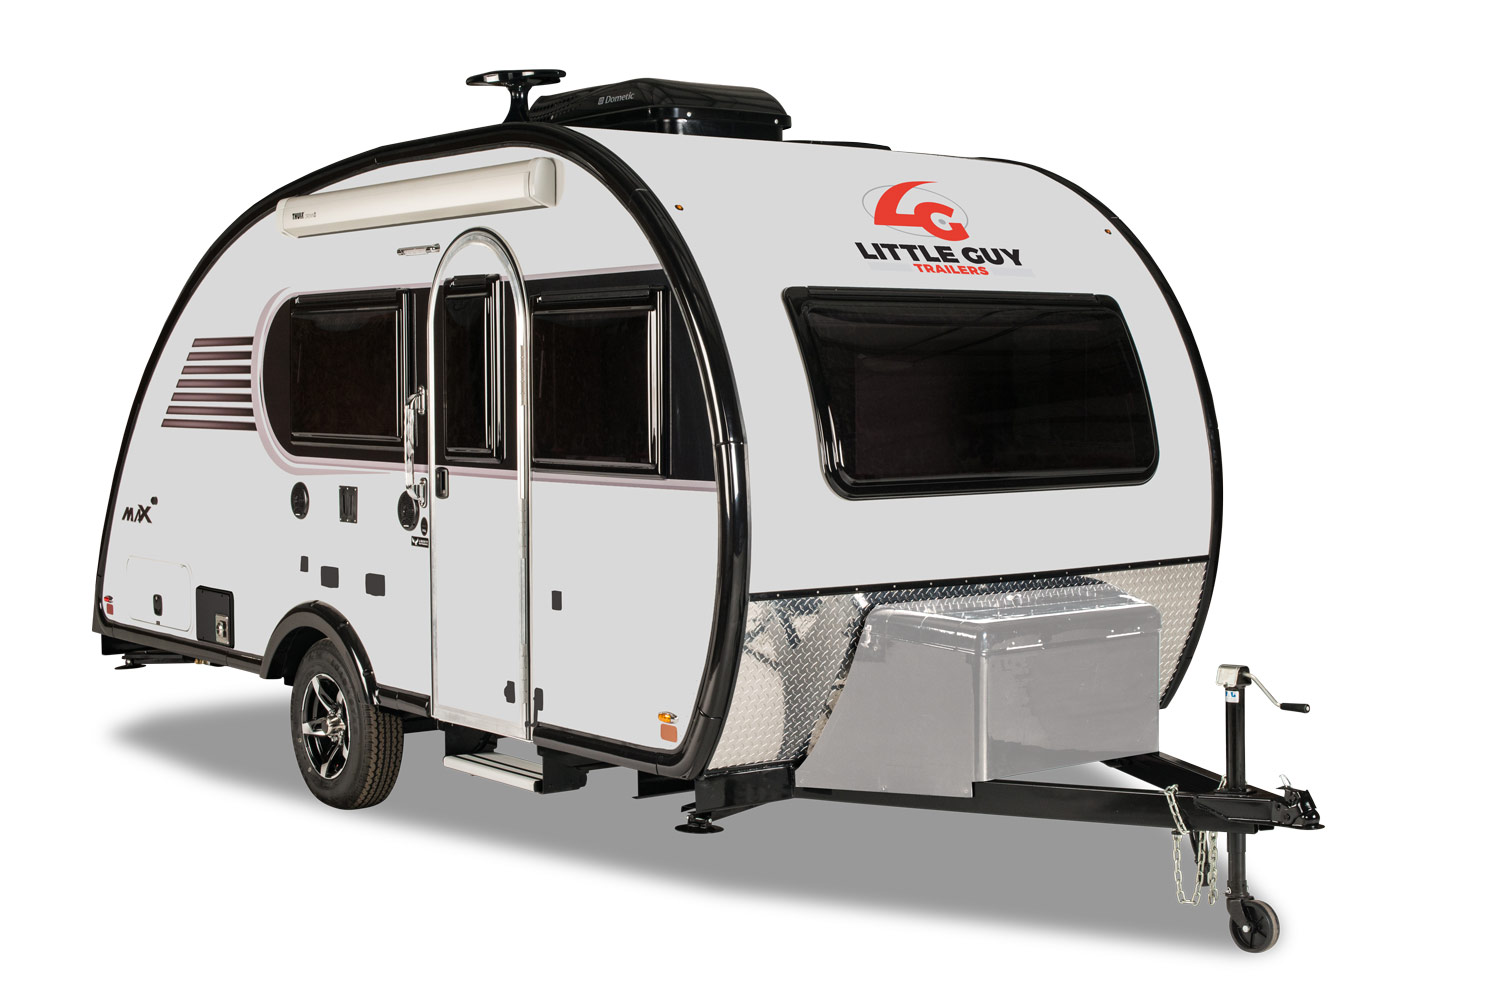 Little Guy Max Worldwide, Teardrop Camper With King Size Bed